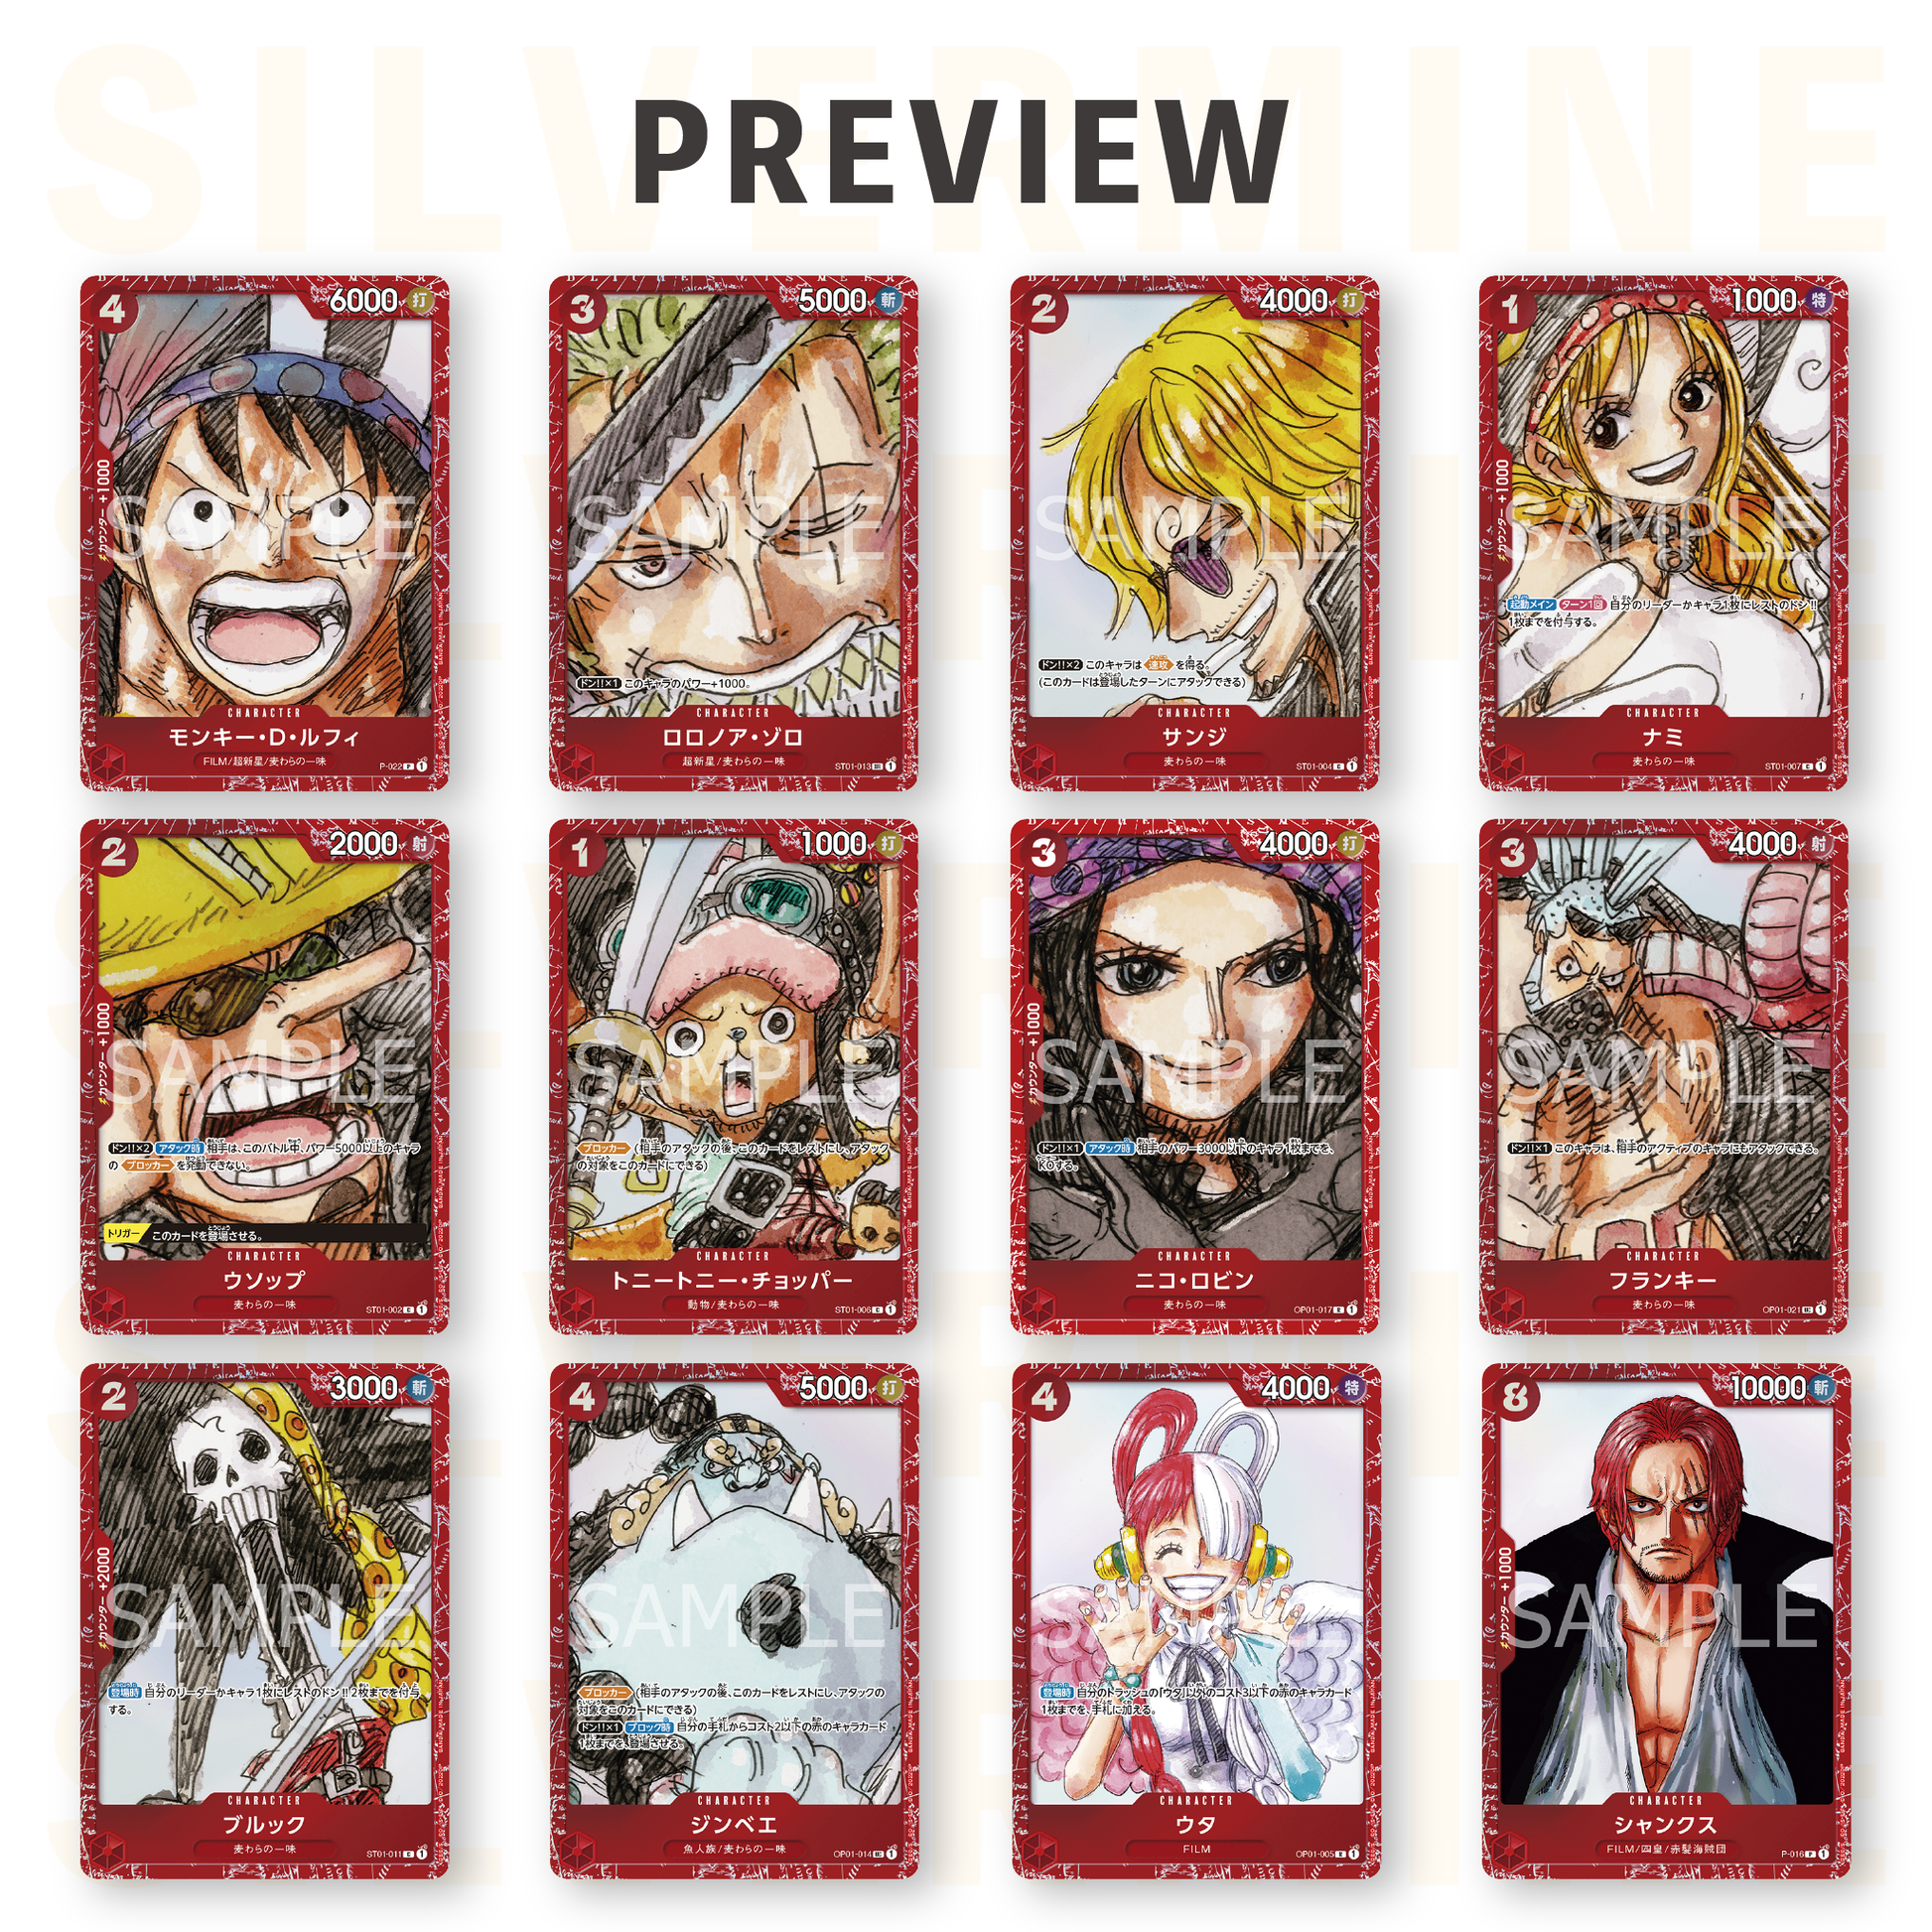 Carddass ONE PIECE CARD GAME PREMIUM CARD COLLECTION - ONE PIECE FILM